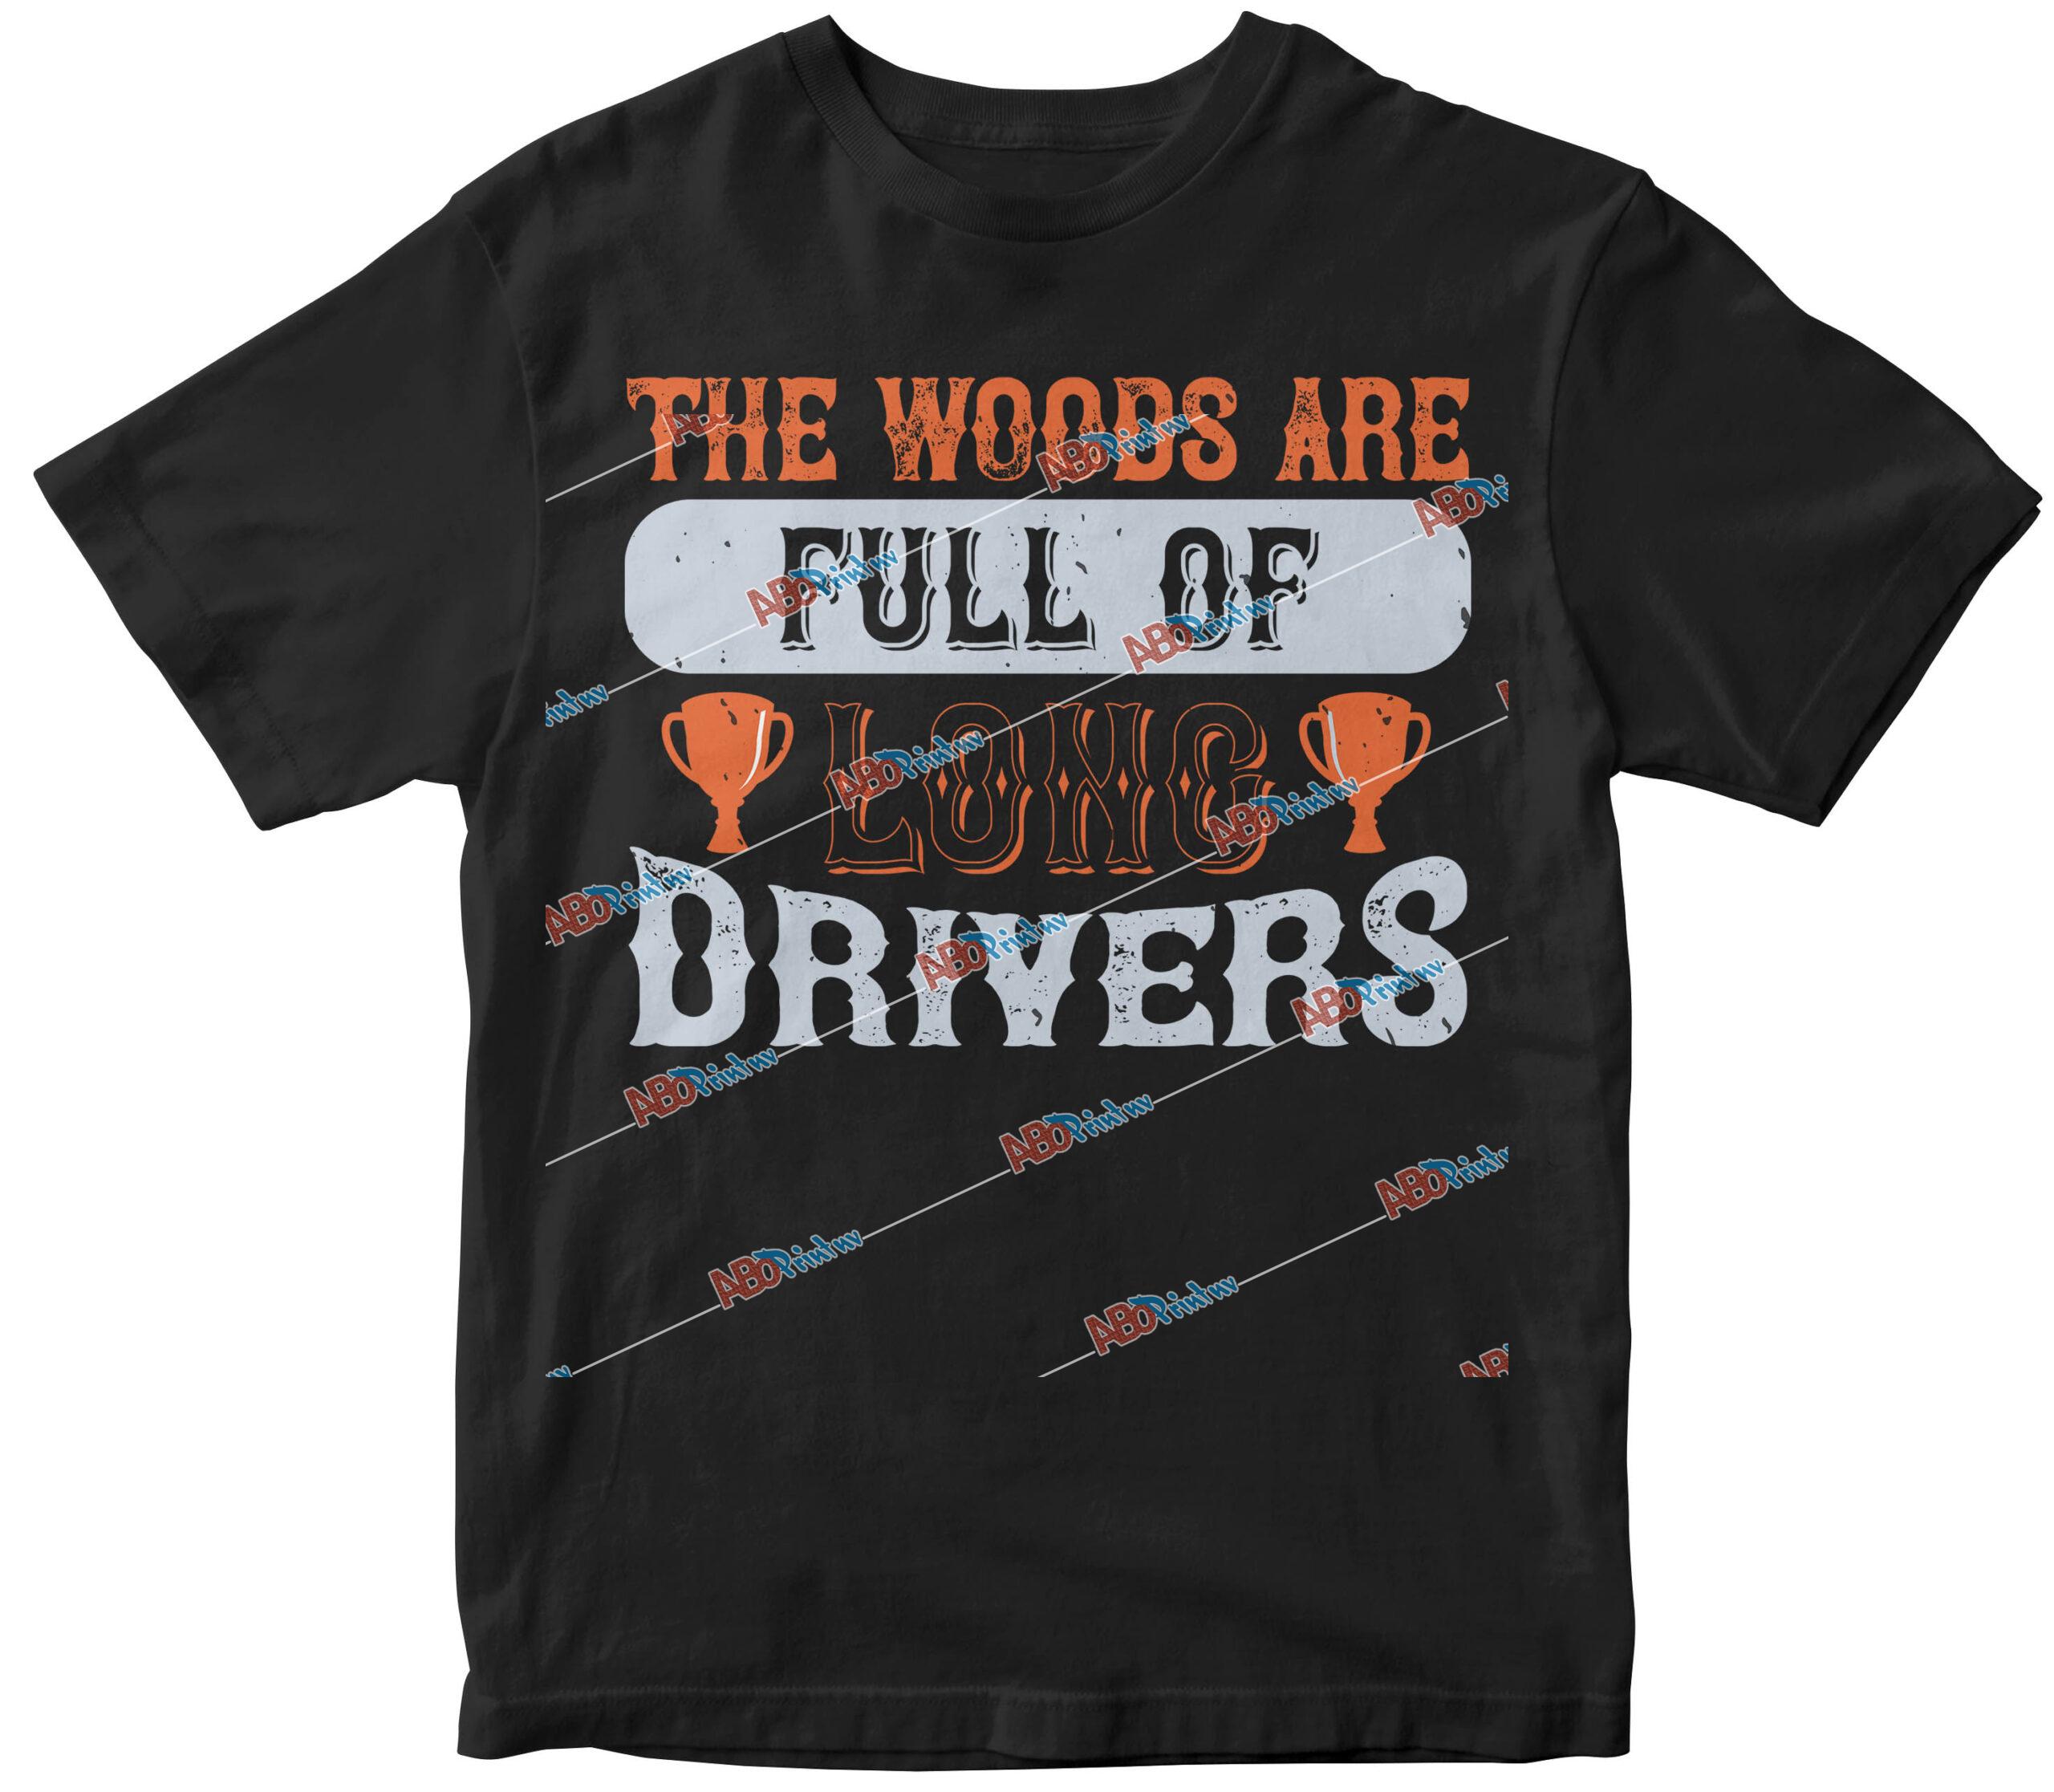 The woods are full of long drivers.jpg